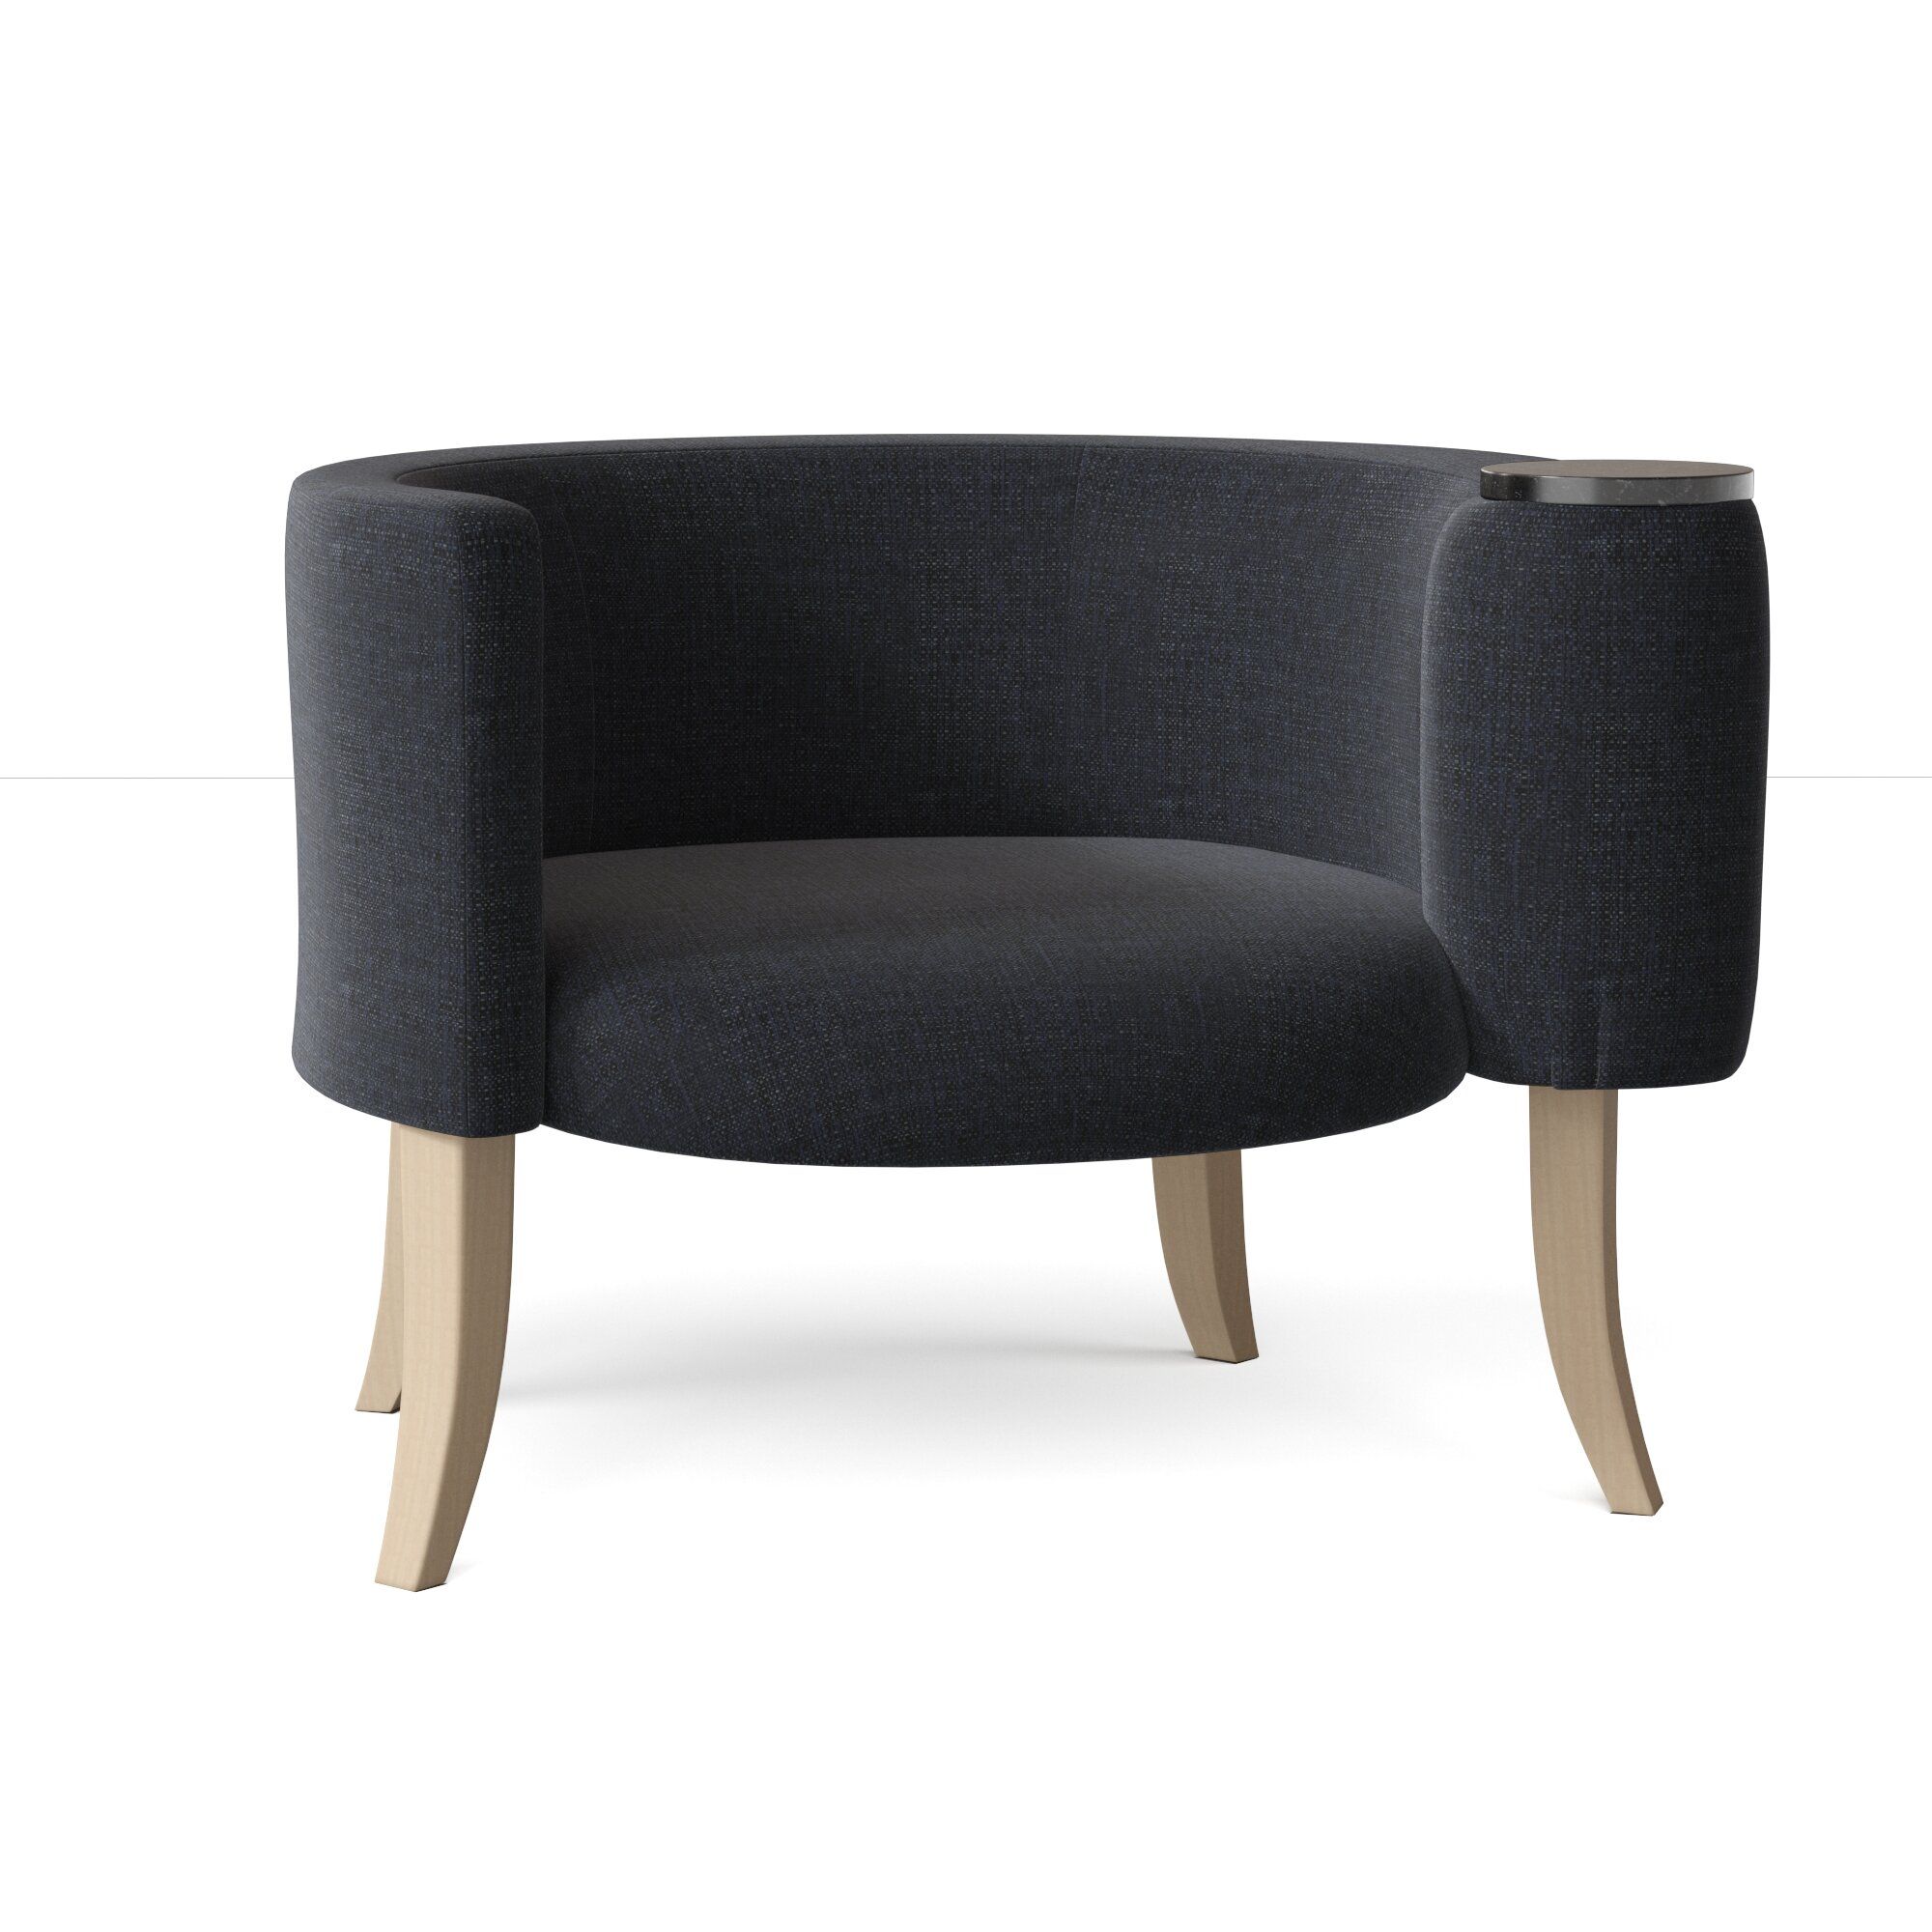 Barrel Accent Chairs On Sale | Wayfair Intended For Giguere Barrel Chairs (Photo 13 of 15)